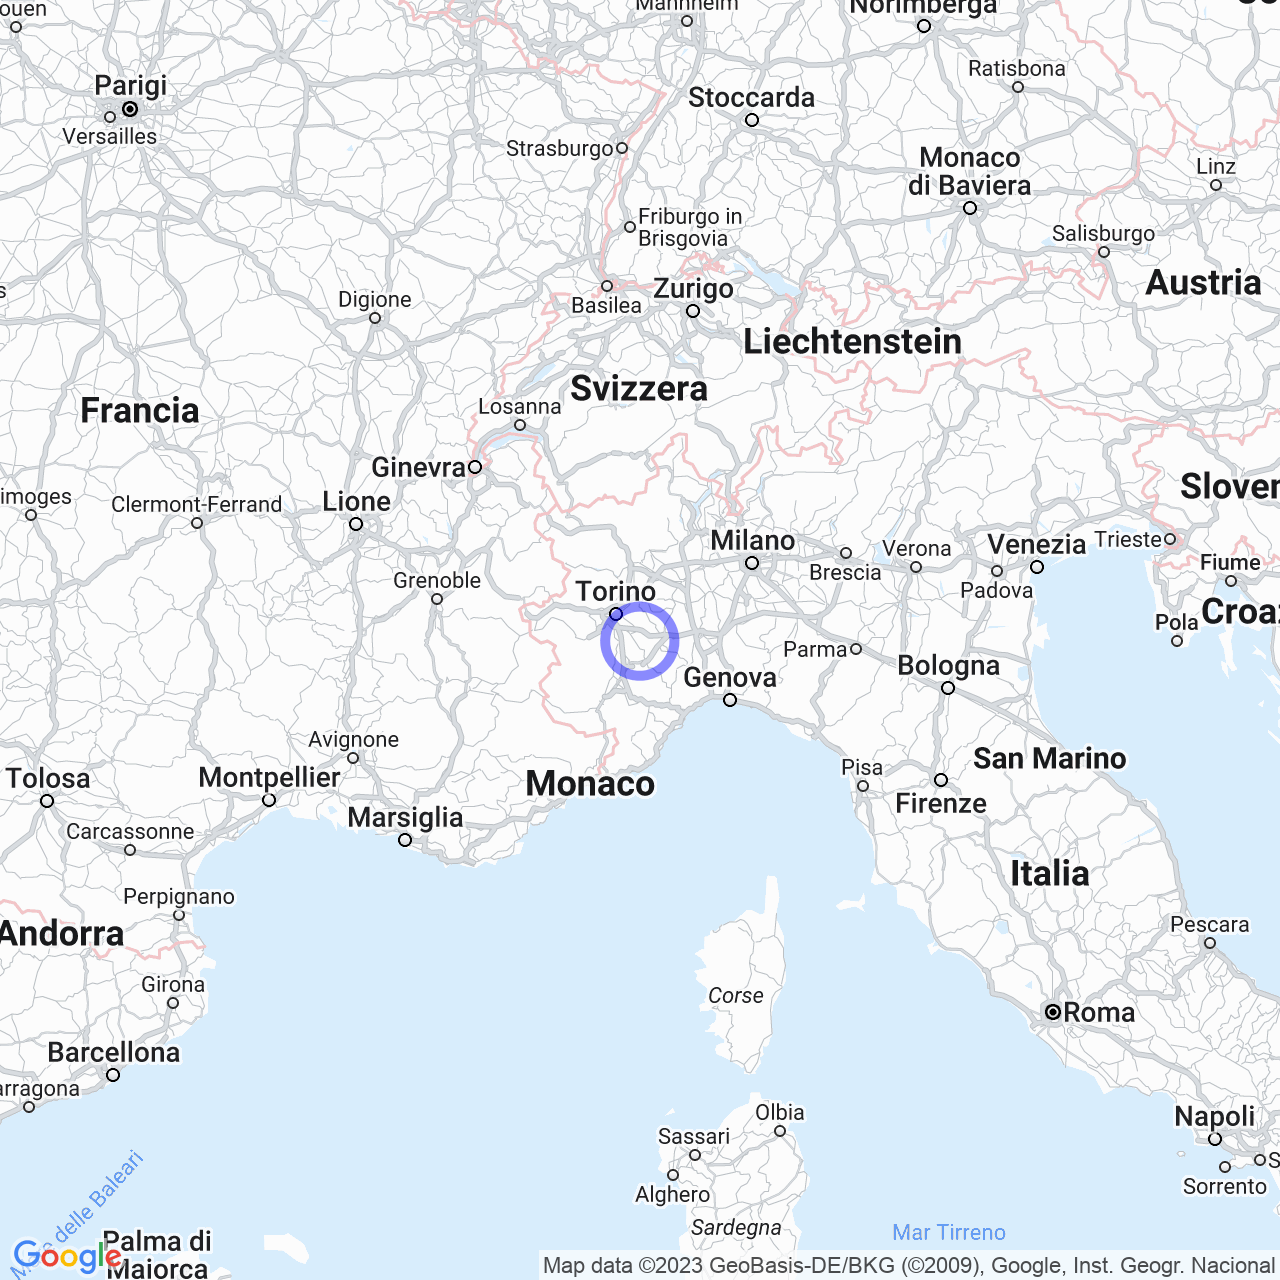 Cellarengo: History, Society and Culture in Piedmont. map